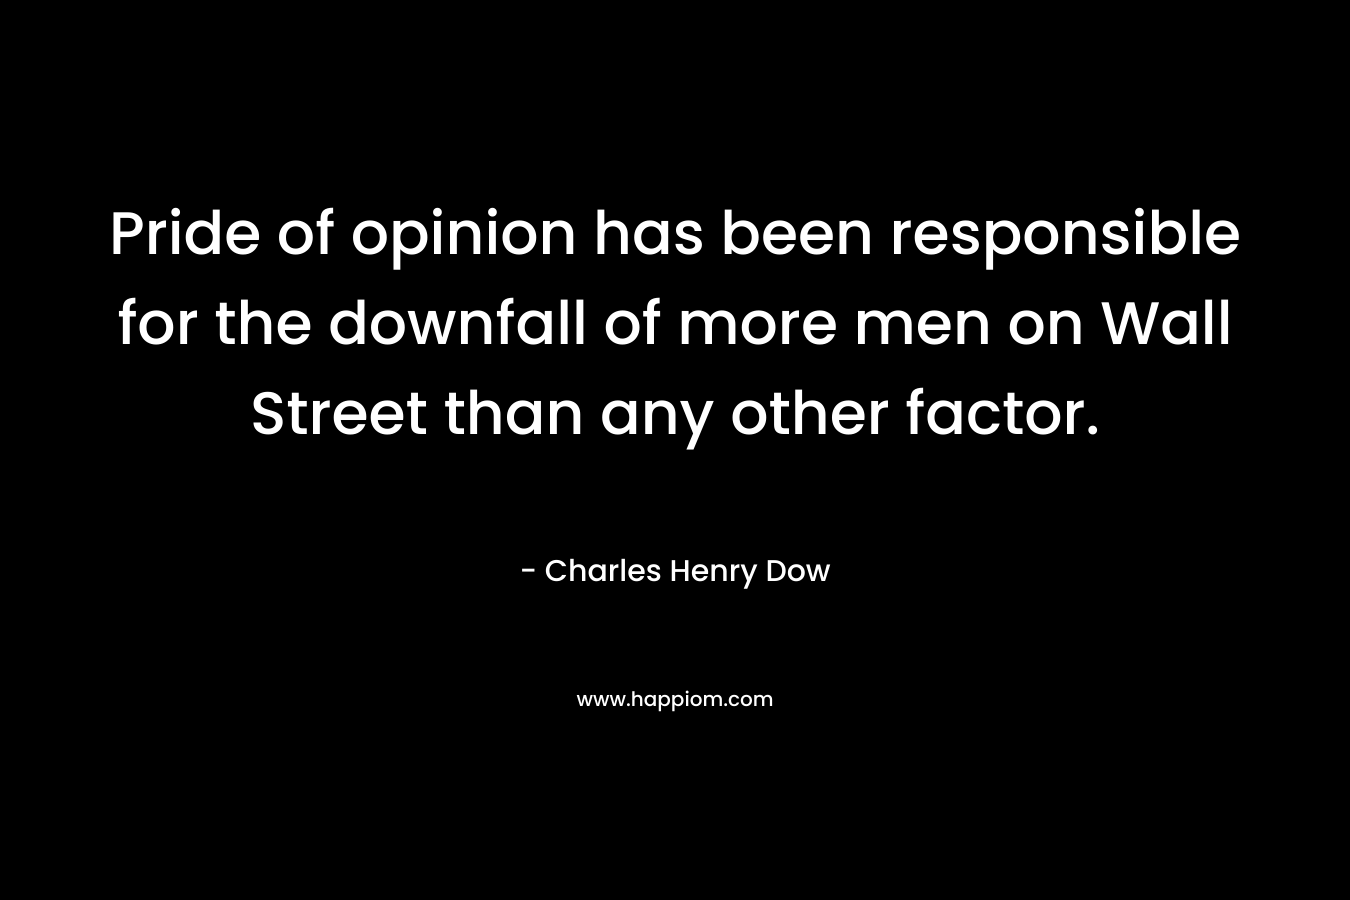 Pride of opinion has been responsible for the downfall of more men on Wall Street than any other factor. – Charles Henry Dow